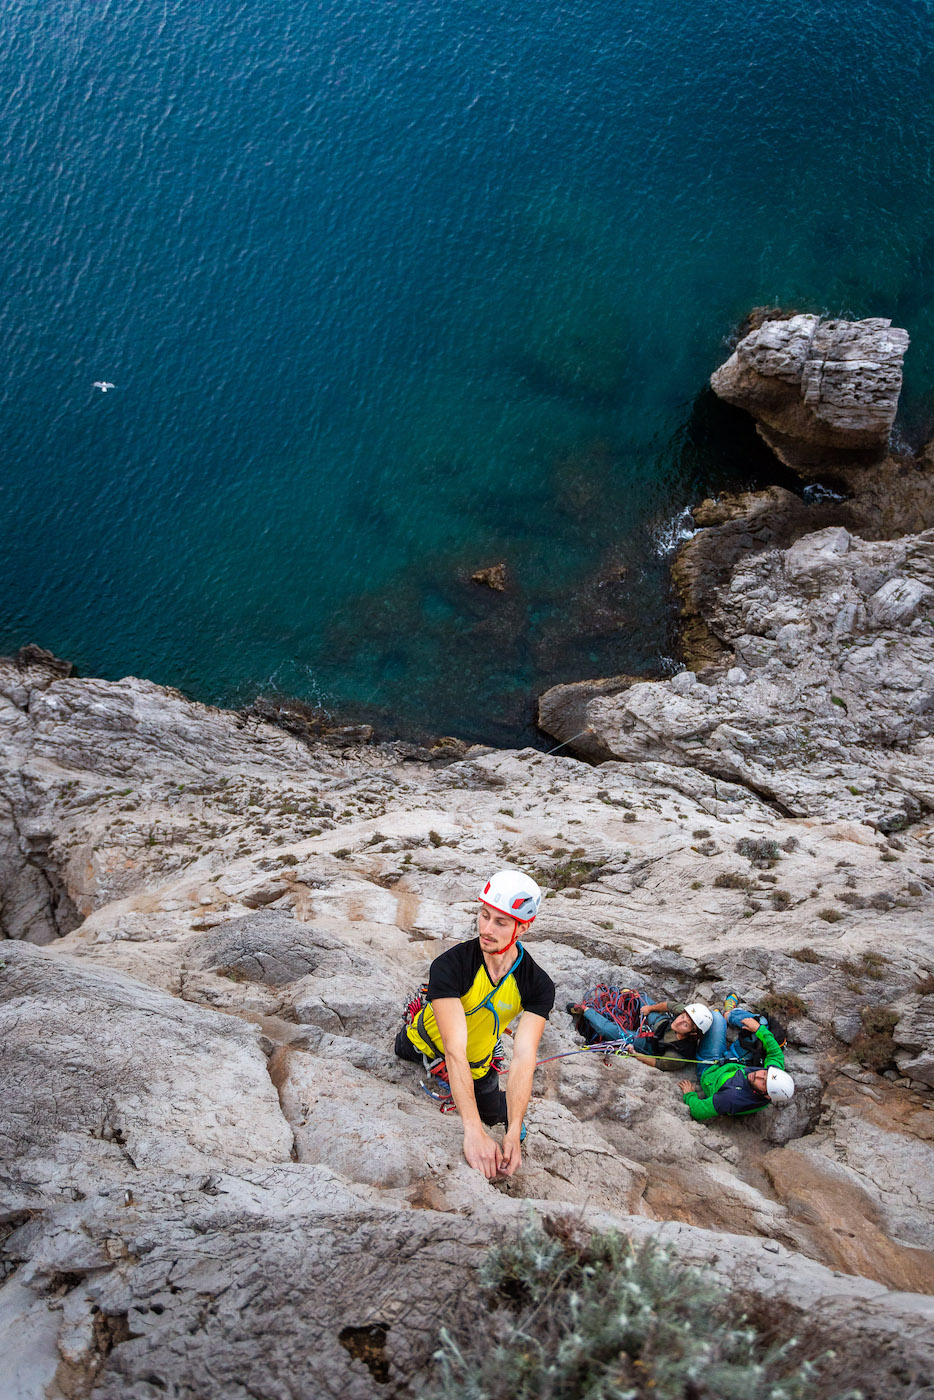 Climber on a multi-pitch route in Positano, Southern Italy